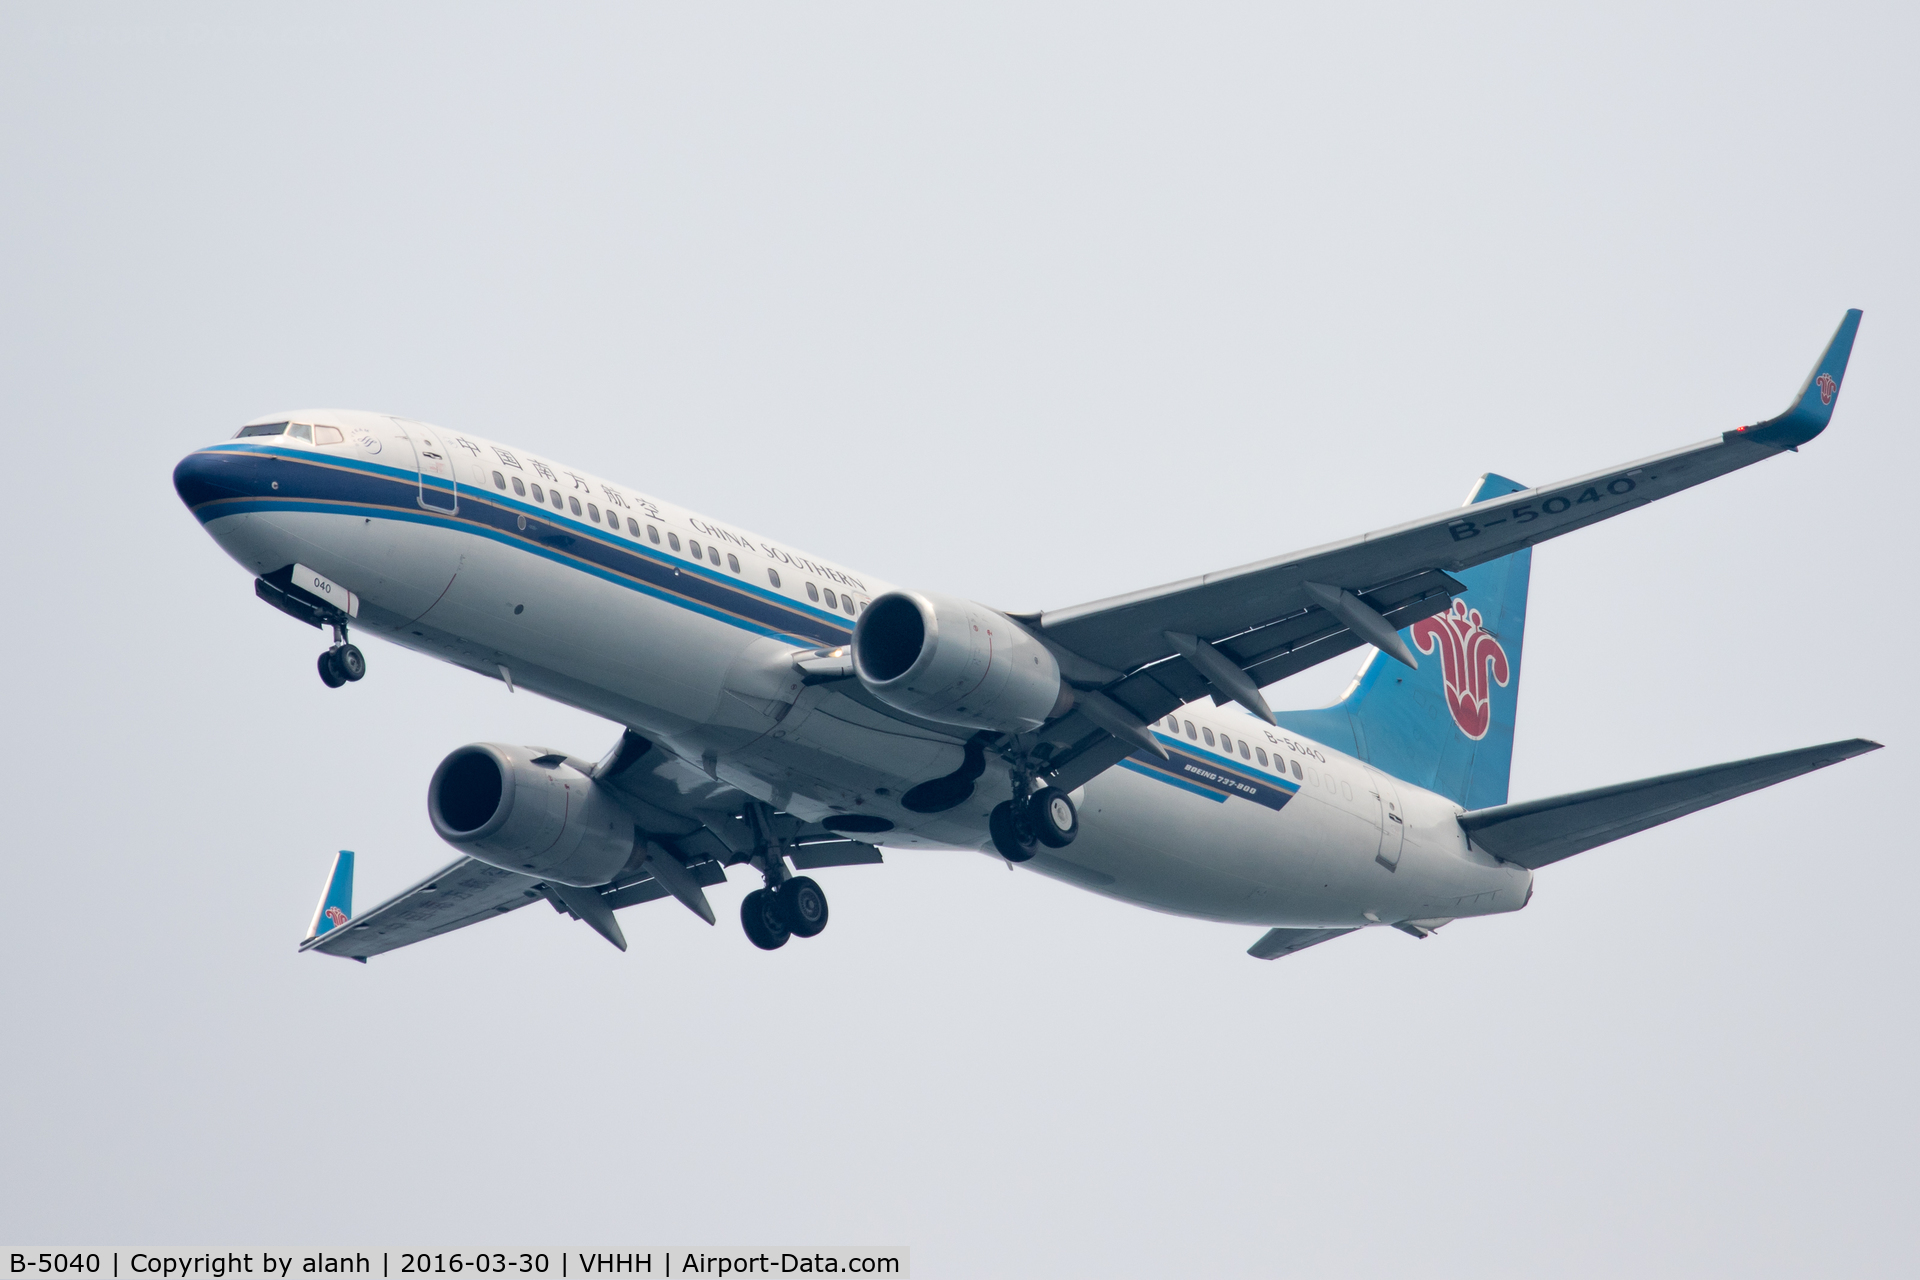 B-5040, 2003 Boeing 737-81B C/N 32929, On finals for Hong Kong